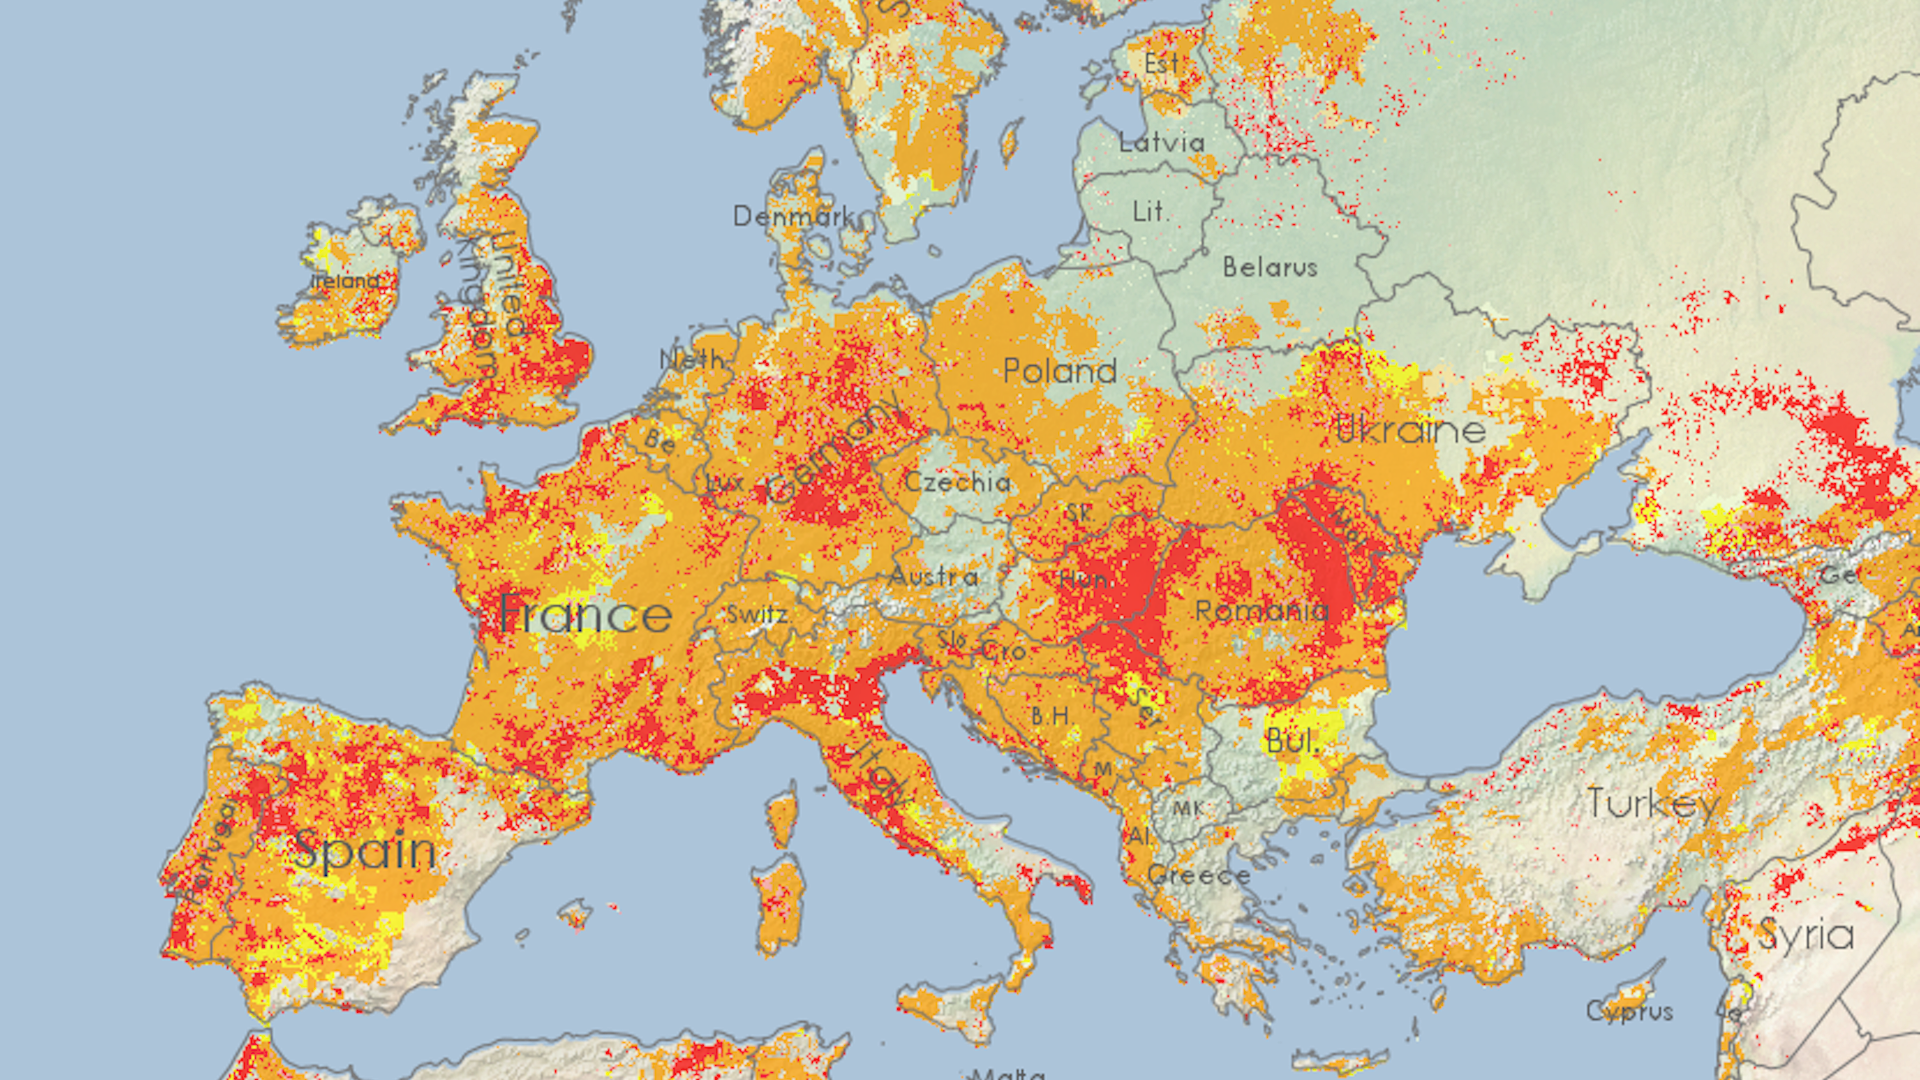 Map showing drought severity across Europe, with red hues indicating the most severe conditions.